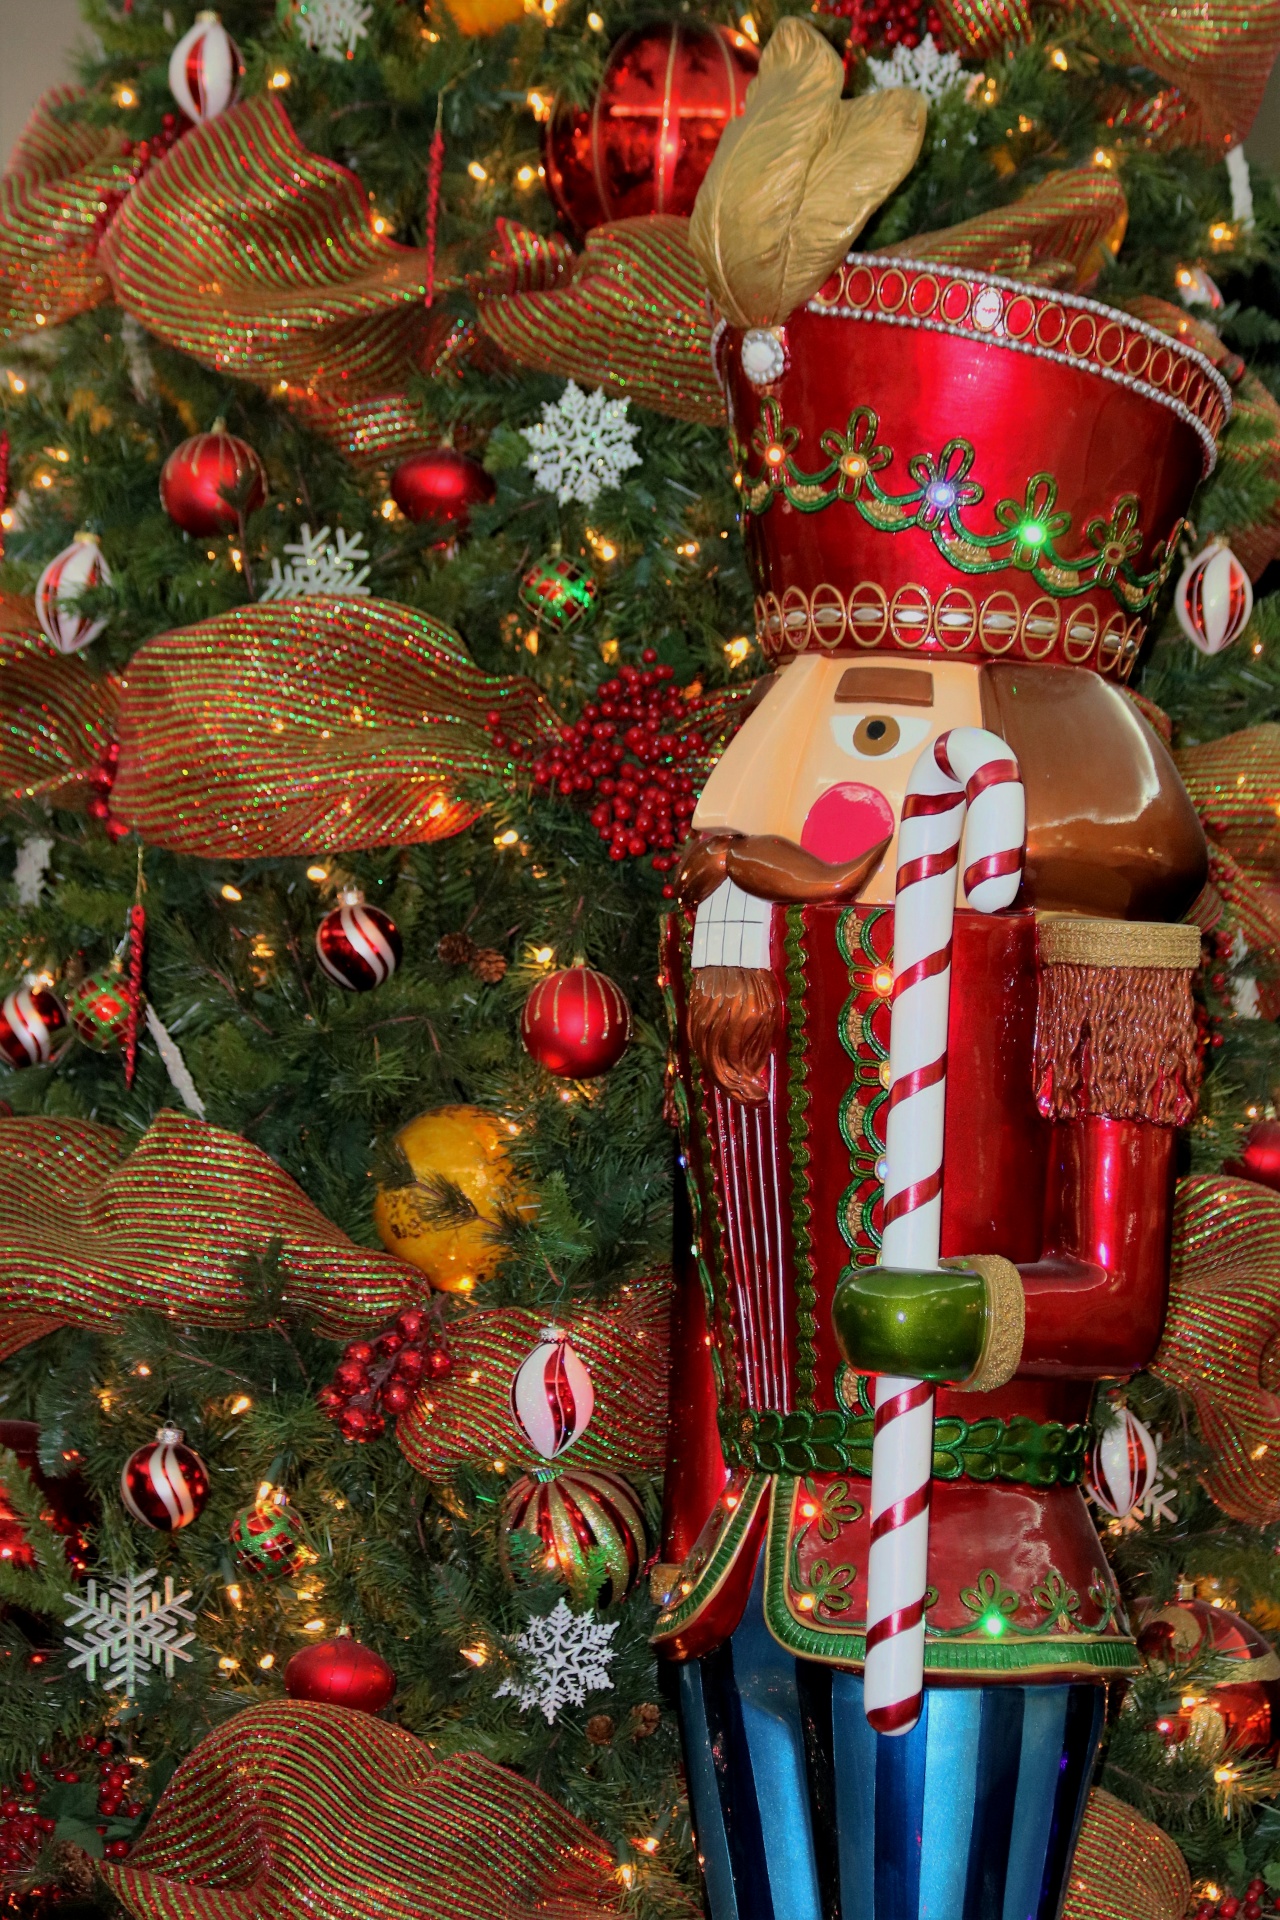 A large nutcracker soldier stands beside a green Christmas tree that is decorated with red and gold ribbon, red berries and red and white Christmas balls.